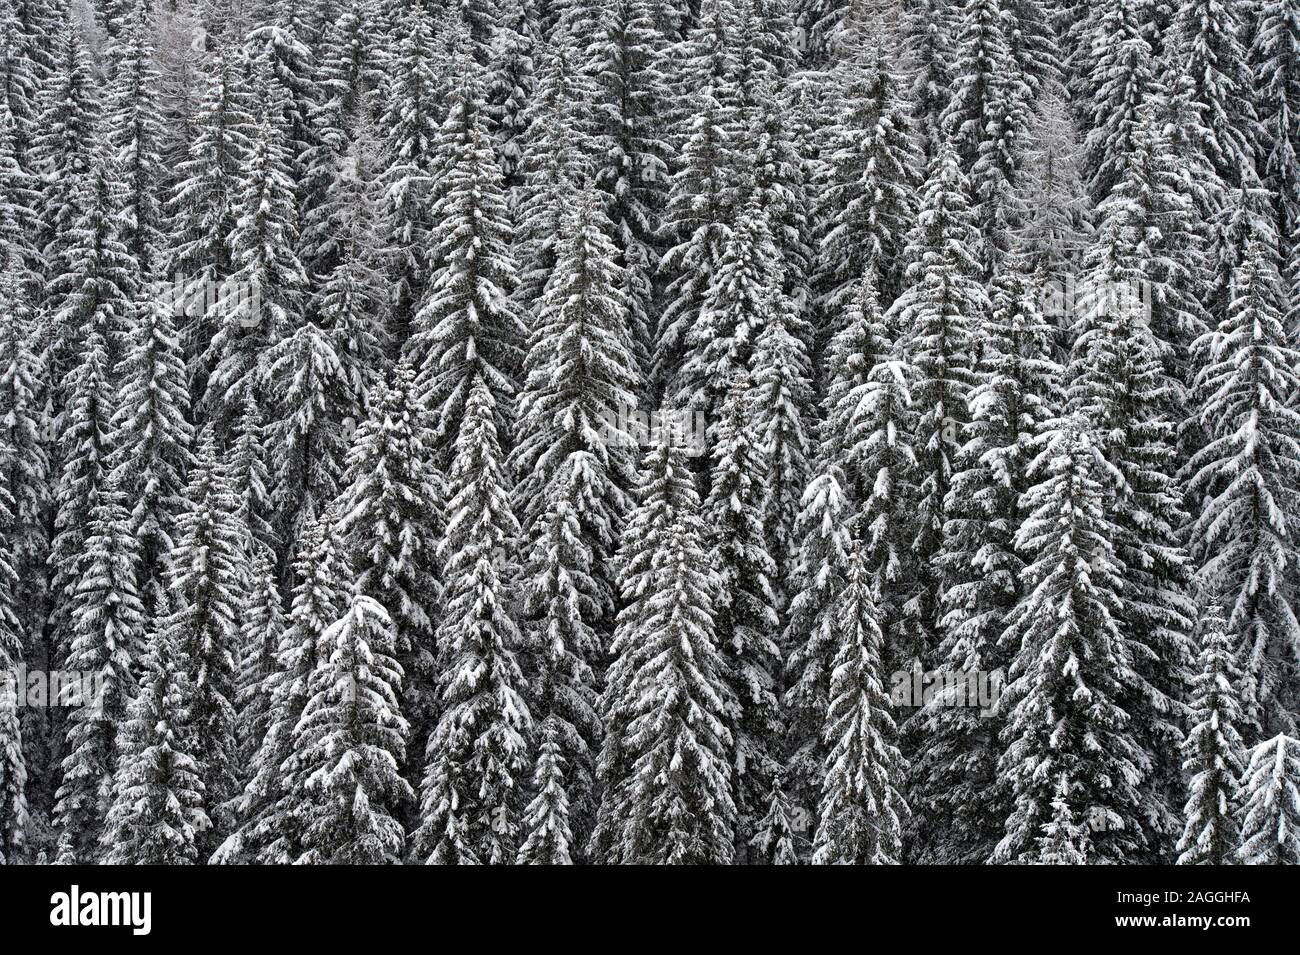 Snow-covered spruces in a forest on a grey winter day, Alta Badia, Dolomites, South Tyrol, Italy Stock Photo